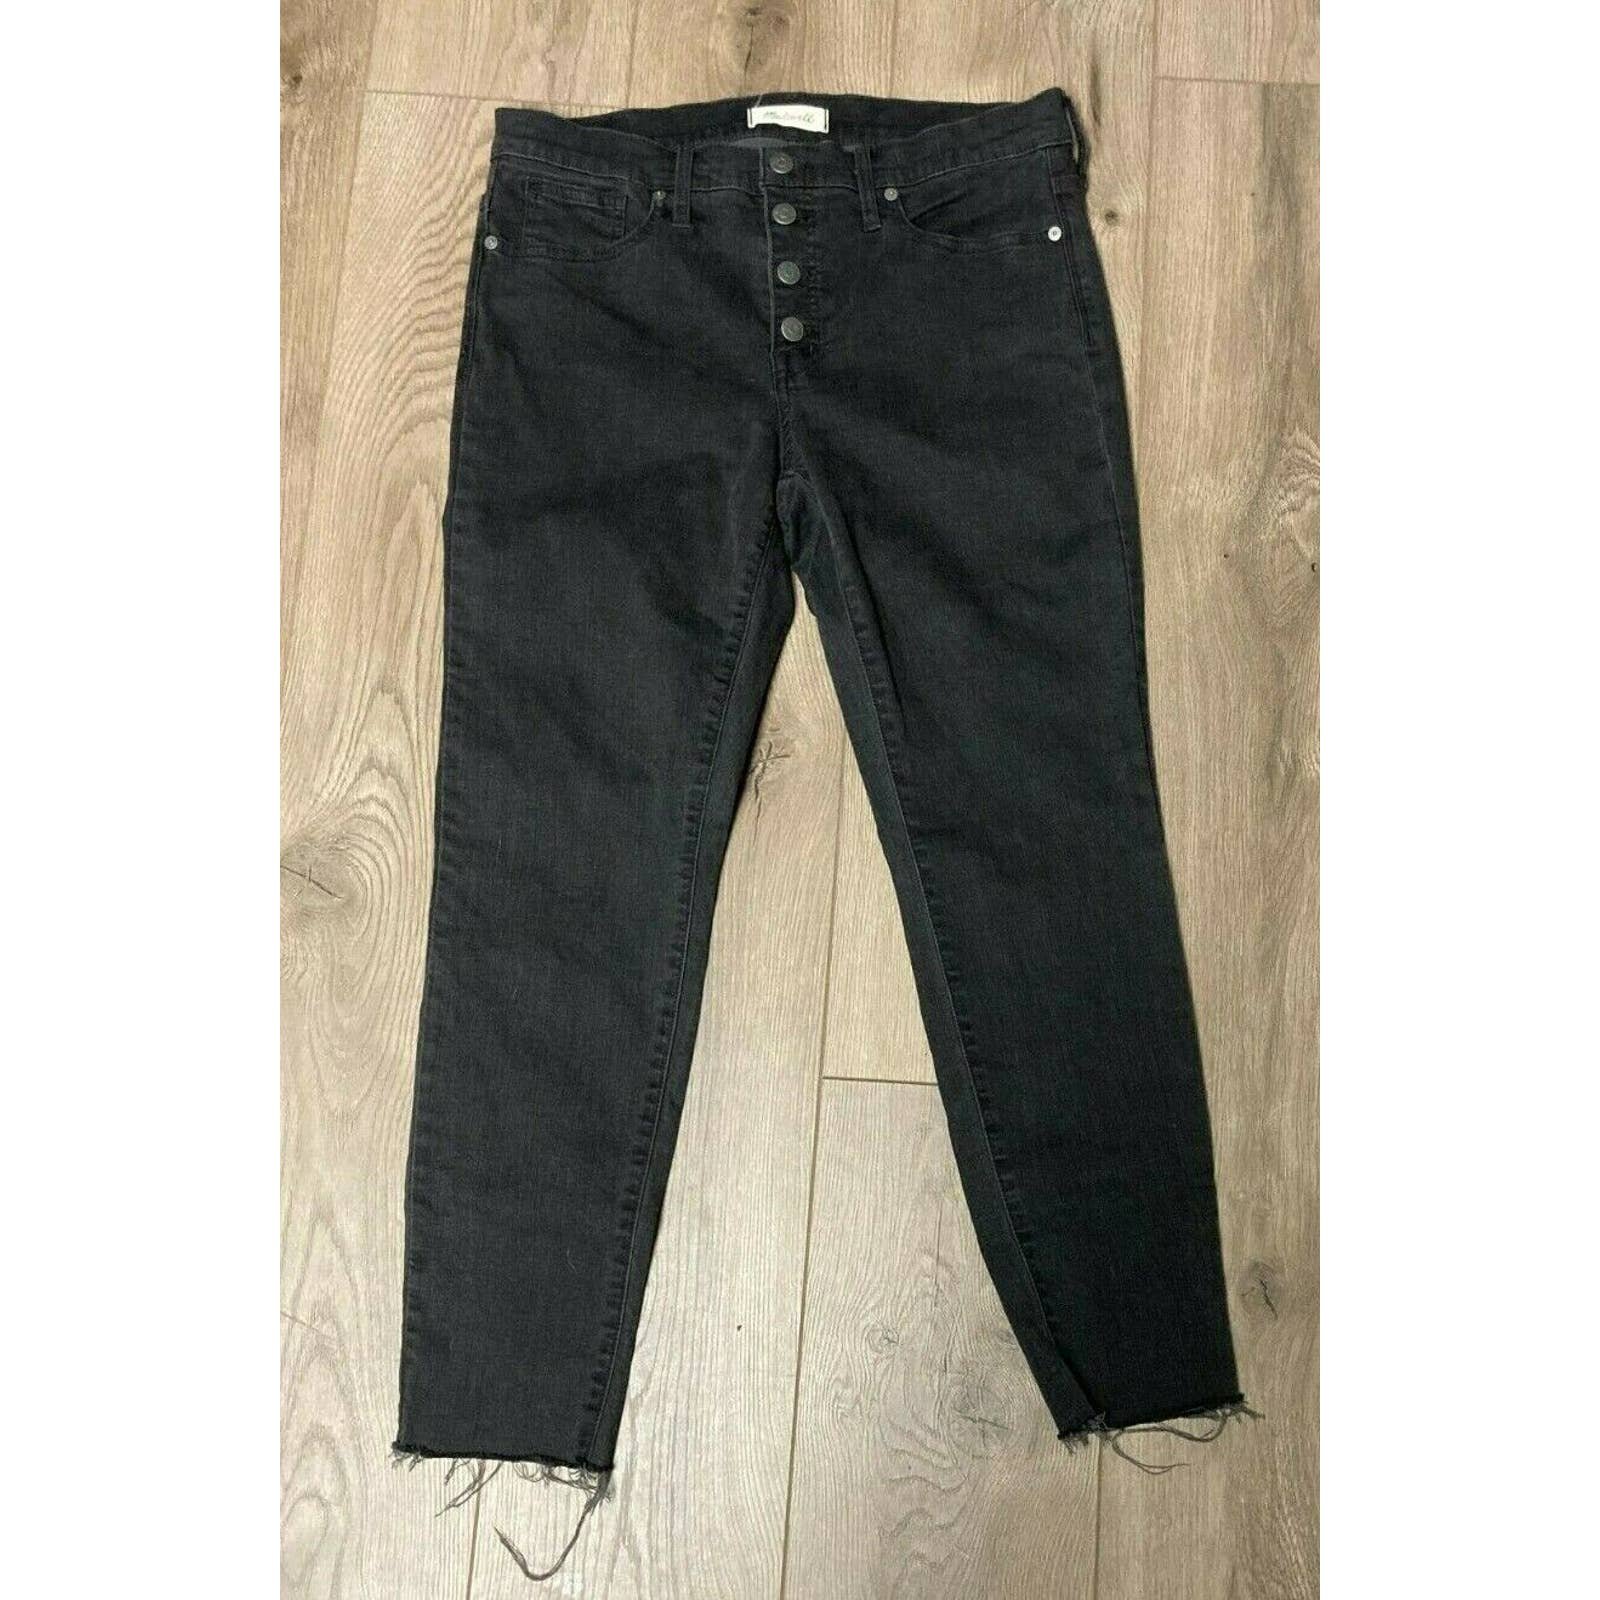 save up to 70% Madewell 31 Mid Rise Skinny Jeans Button Through Berkeley Black Chewed Hem oXKtqYpay all for you